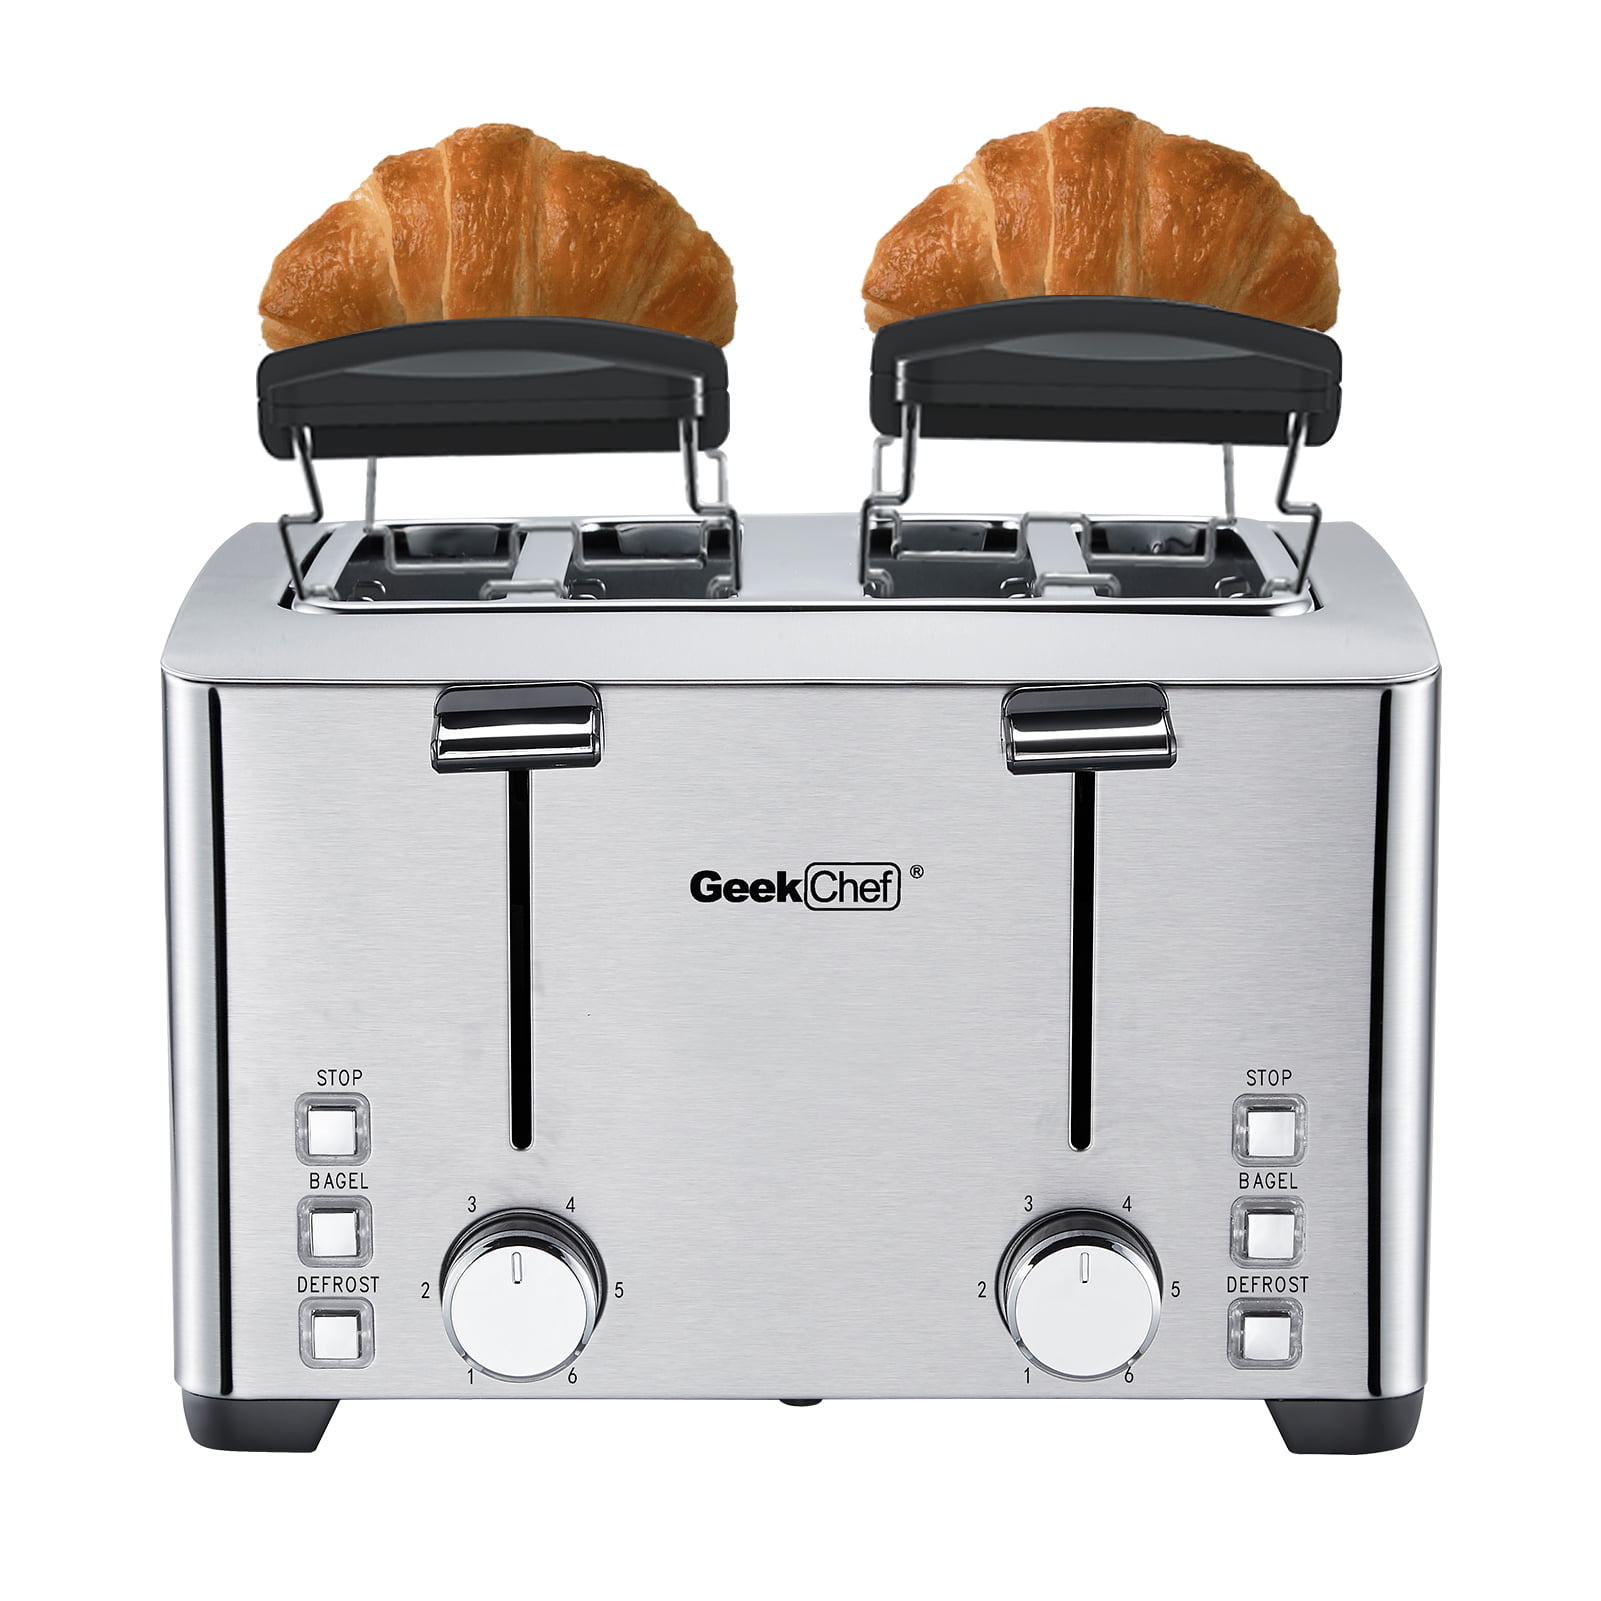  Swan Nordic Toaster 4 Slice with Extra Wide Slots for Bagels,  Waffles, Breads, Cancel, Defrost and Bagel Function, 6 Brown Settings,  Slate Grey (ST14620GRYN): Home & Kitchen